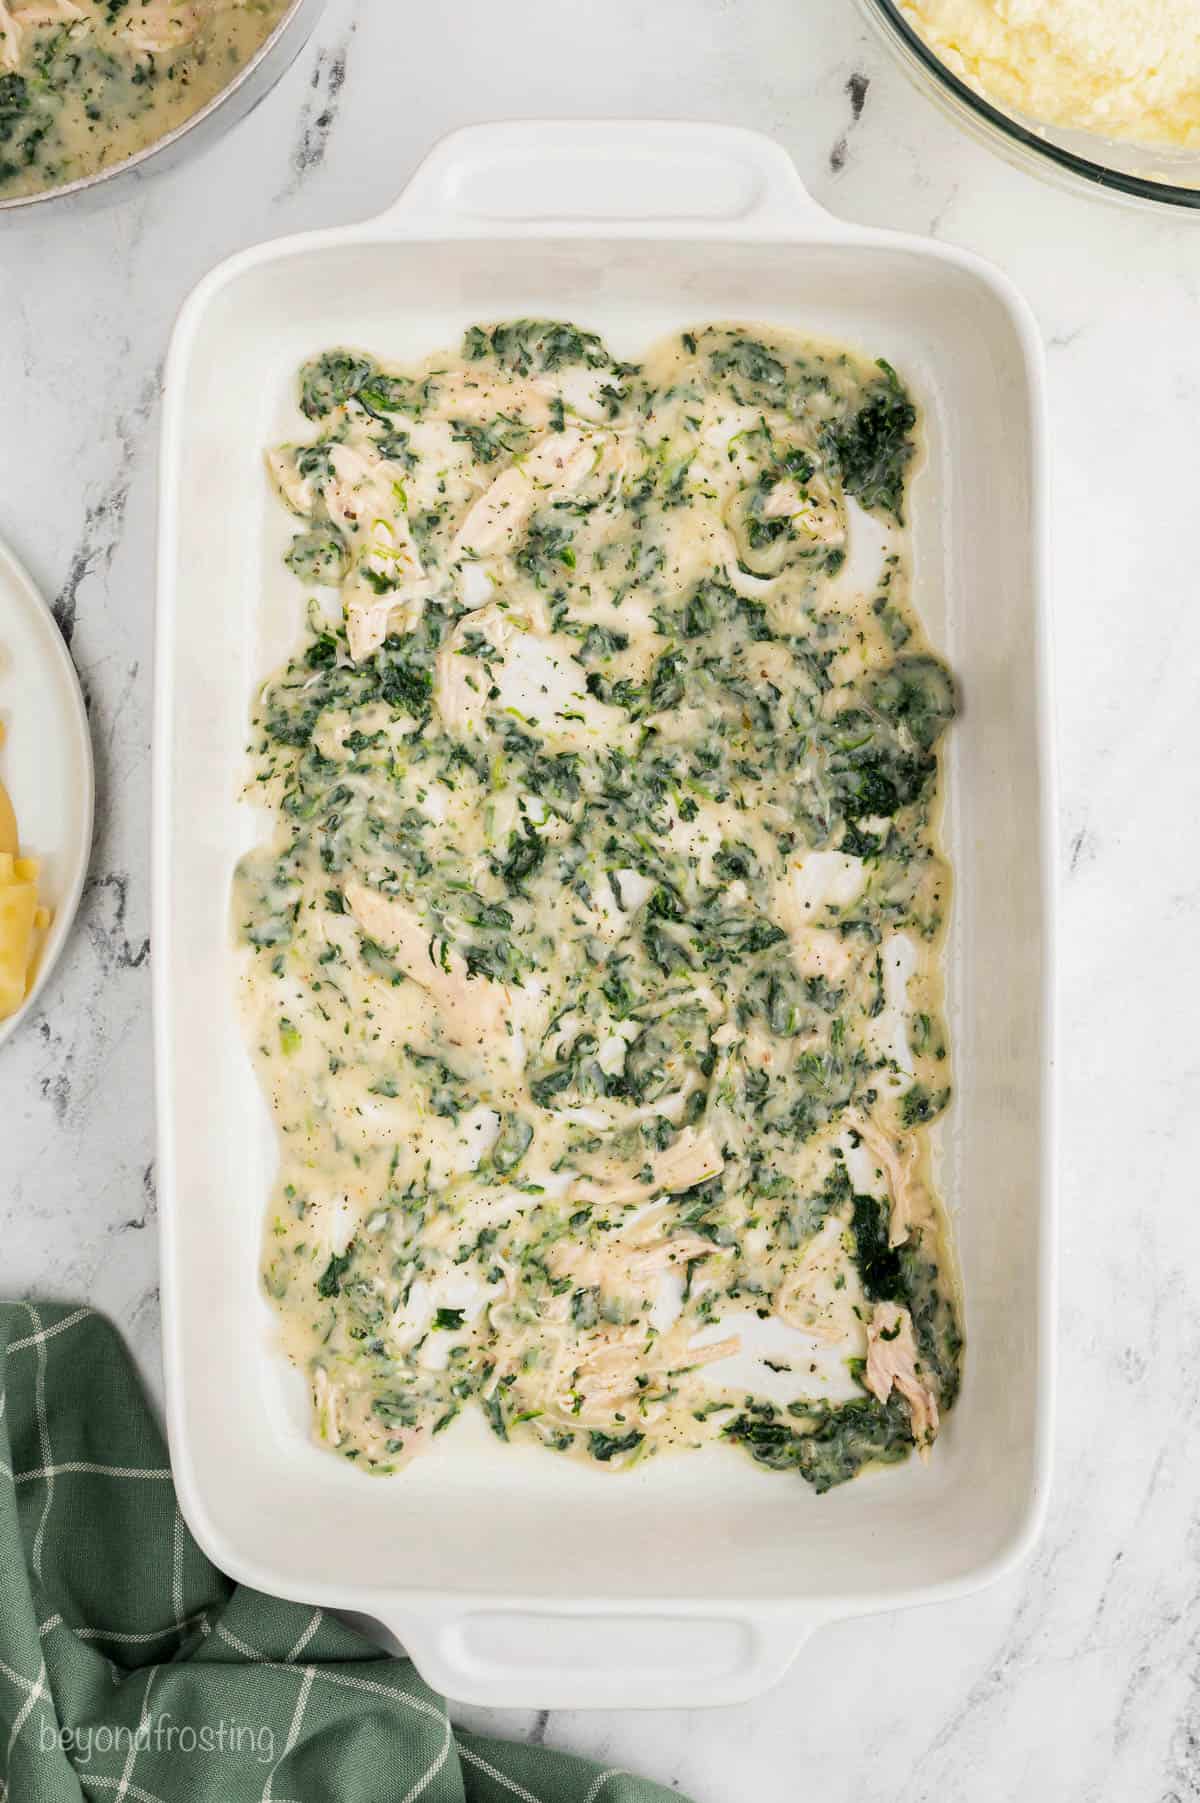 Spinach sauce spread over noodles in a casserole dish